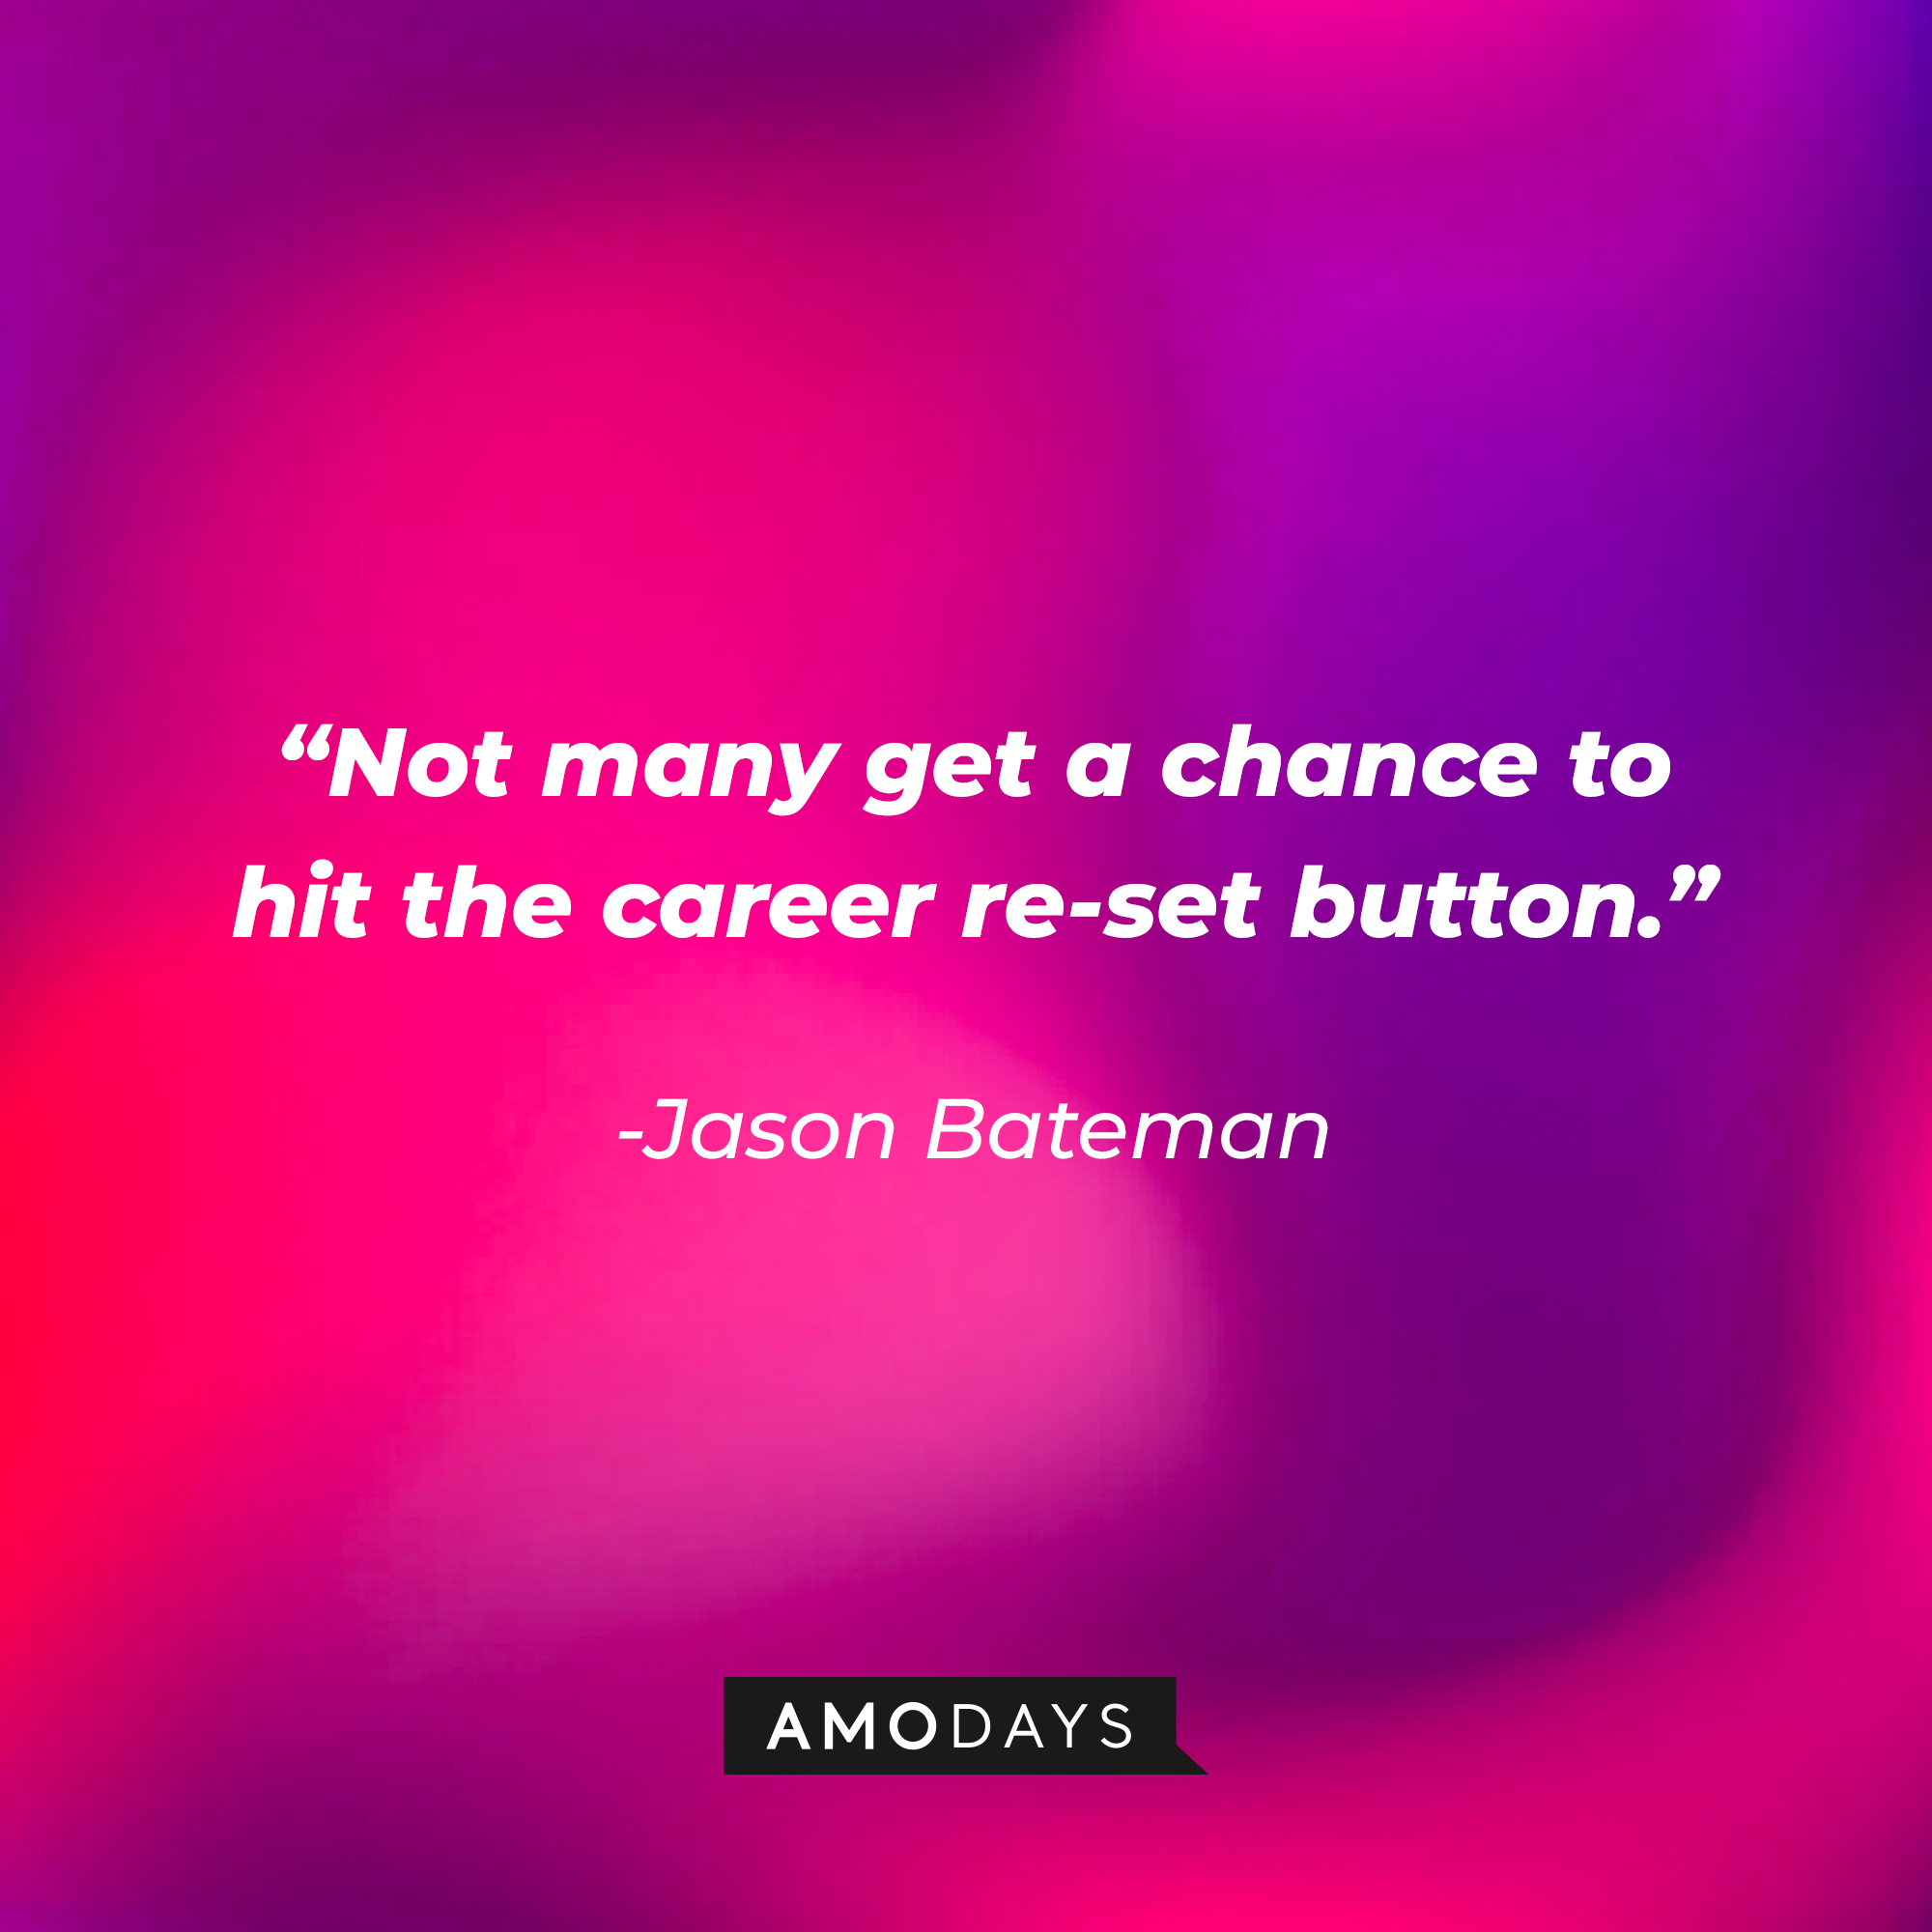 Jason Bateman's quote: “Not many get a chance to hit the career re-set button.” | Source: Amodays